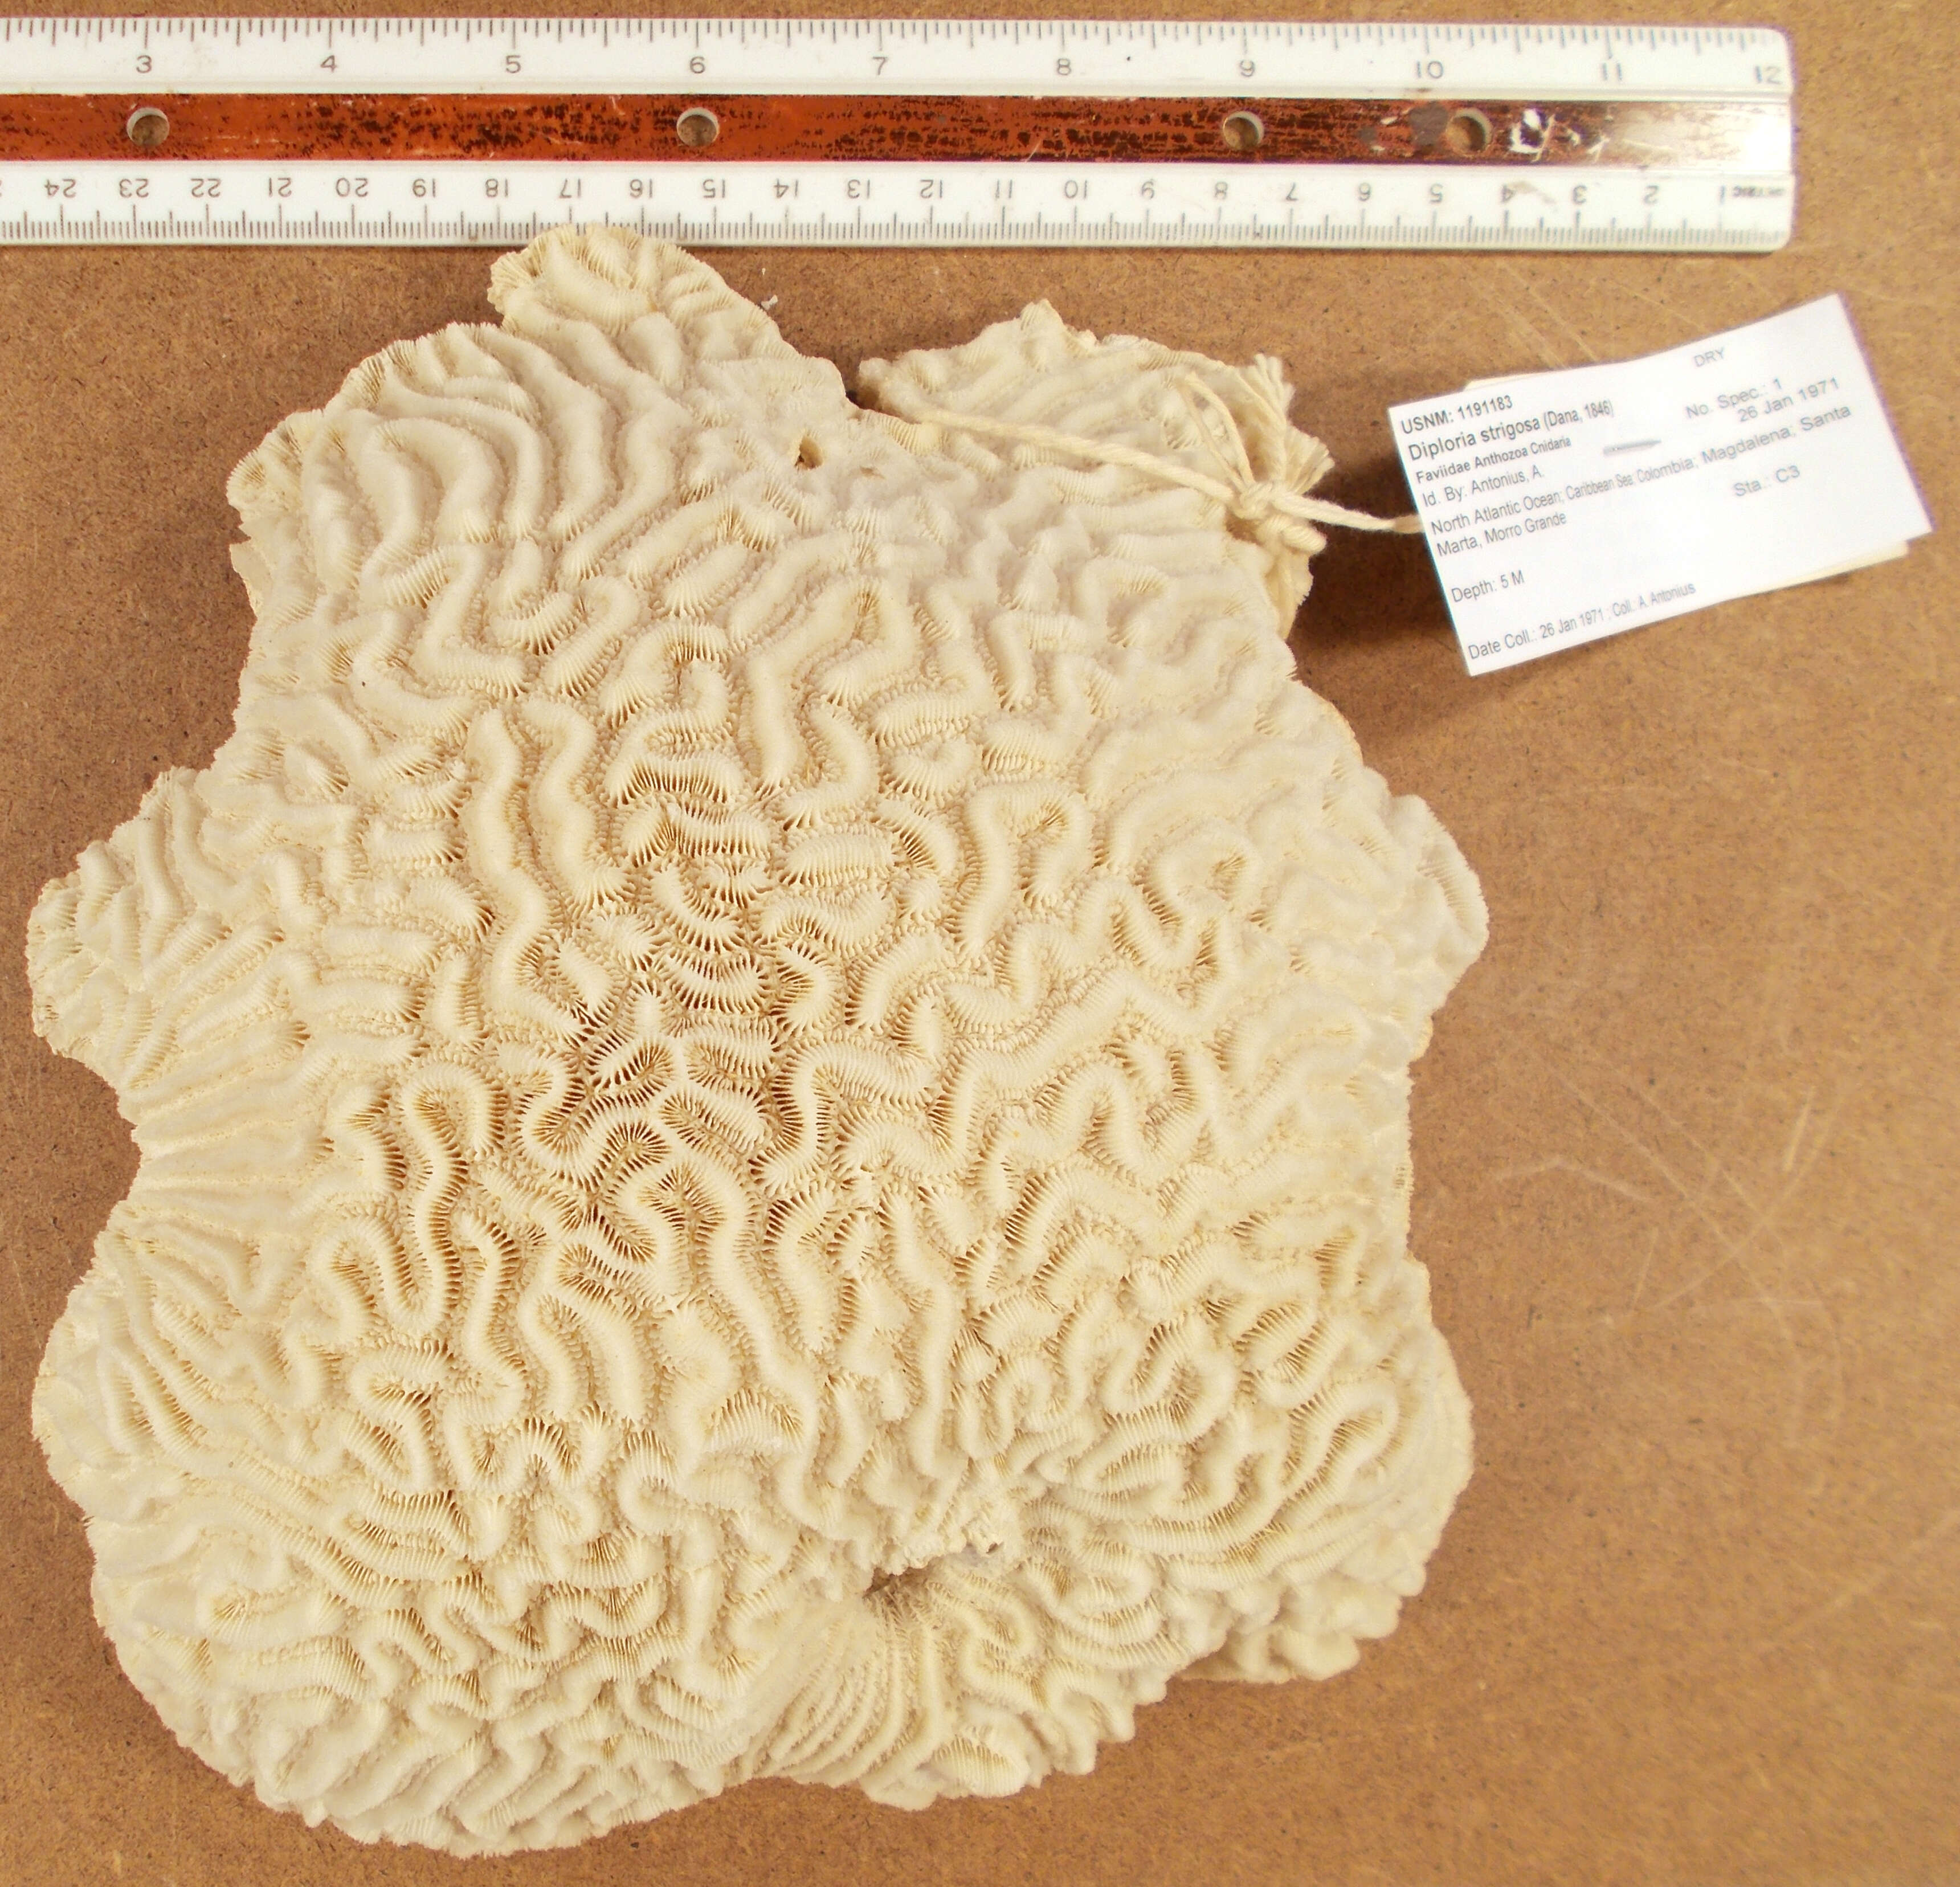 Image of Thin finger coral